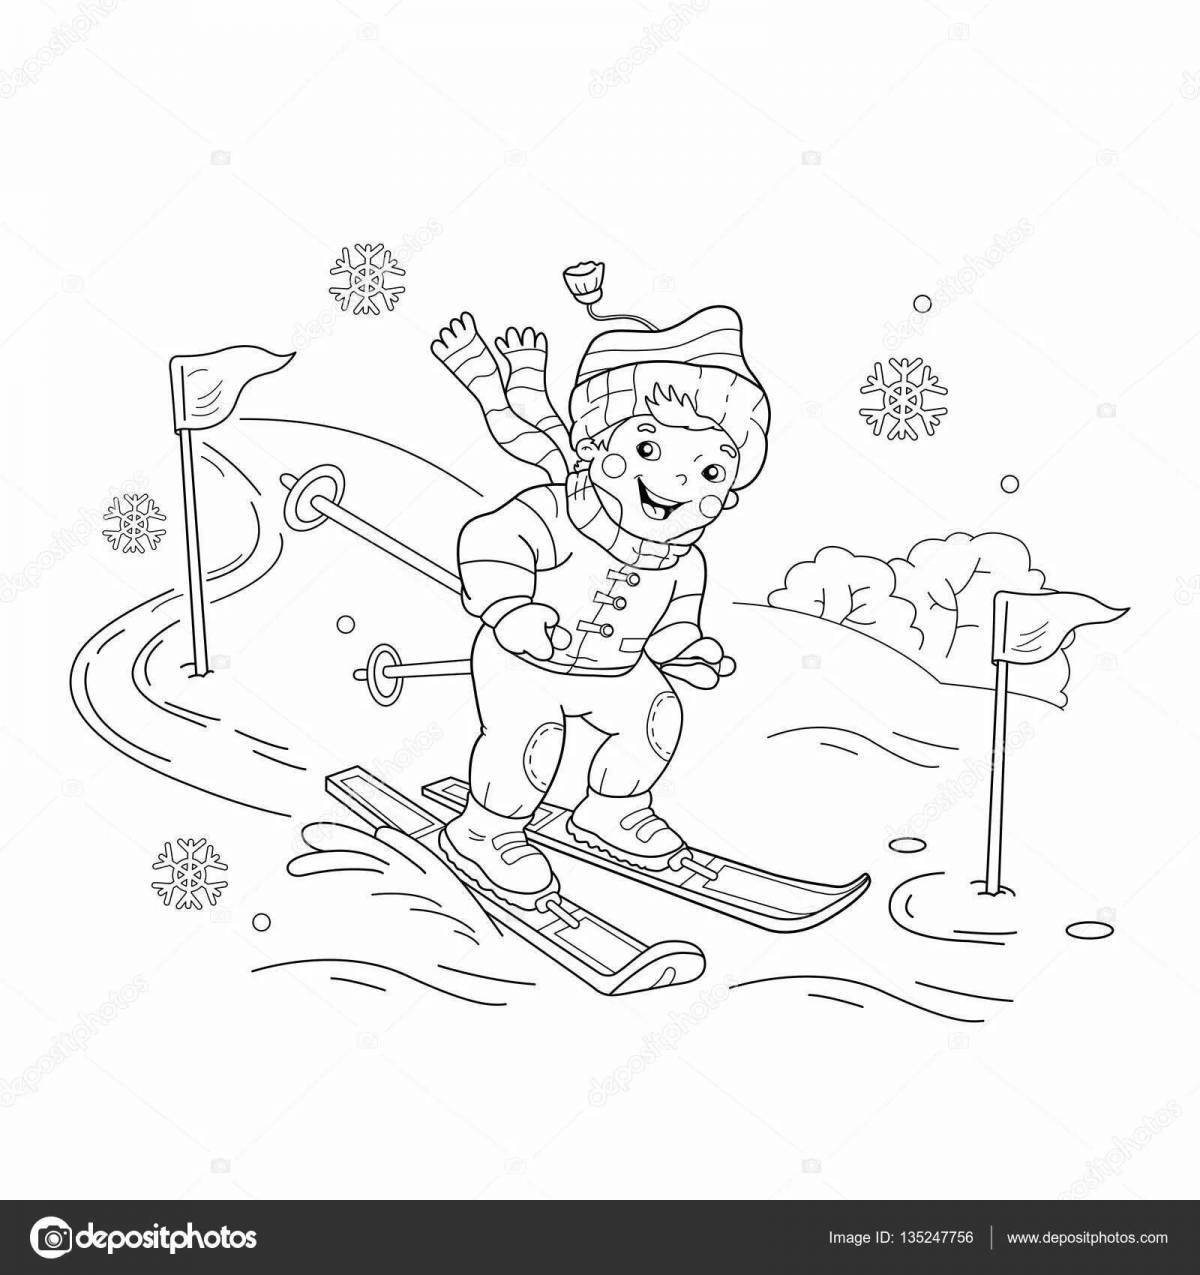 Coloring page adorable boy on skis